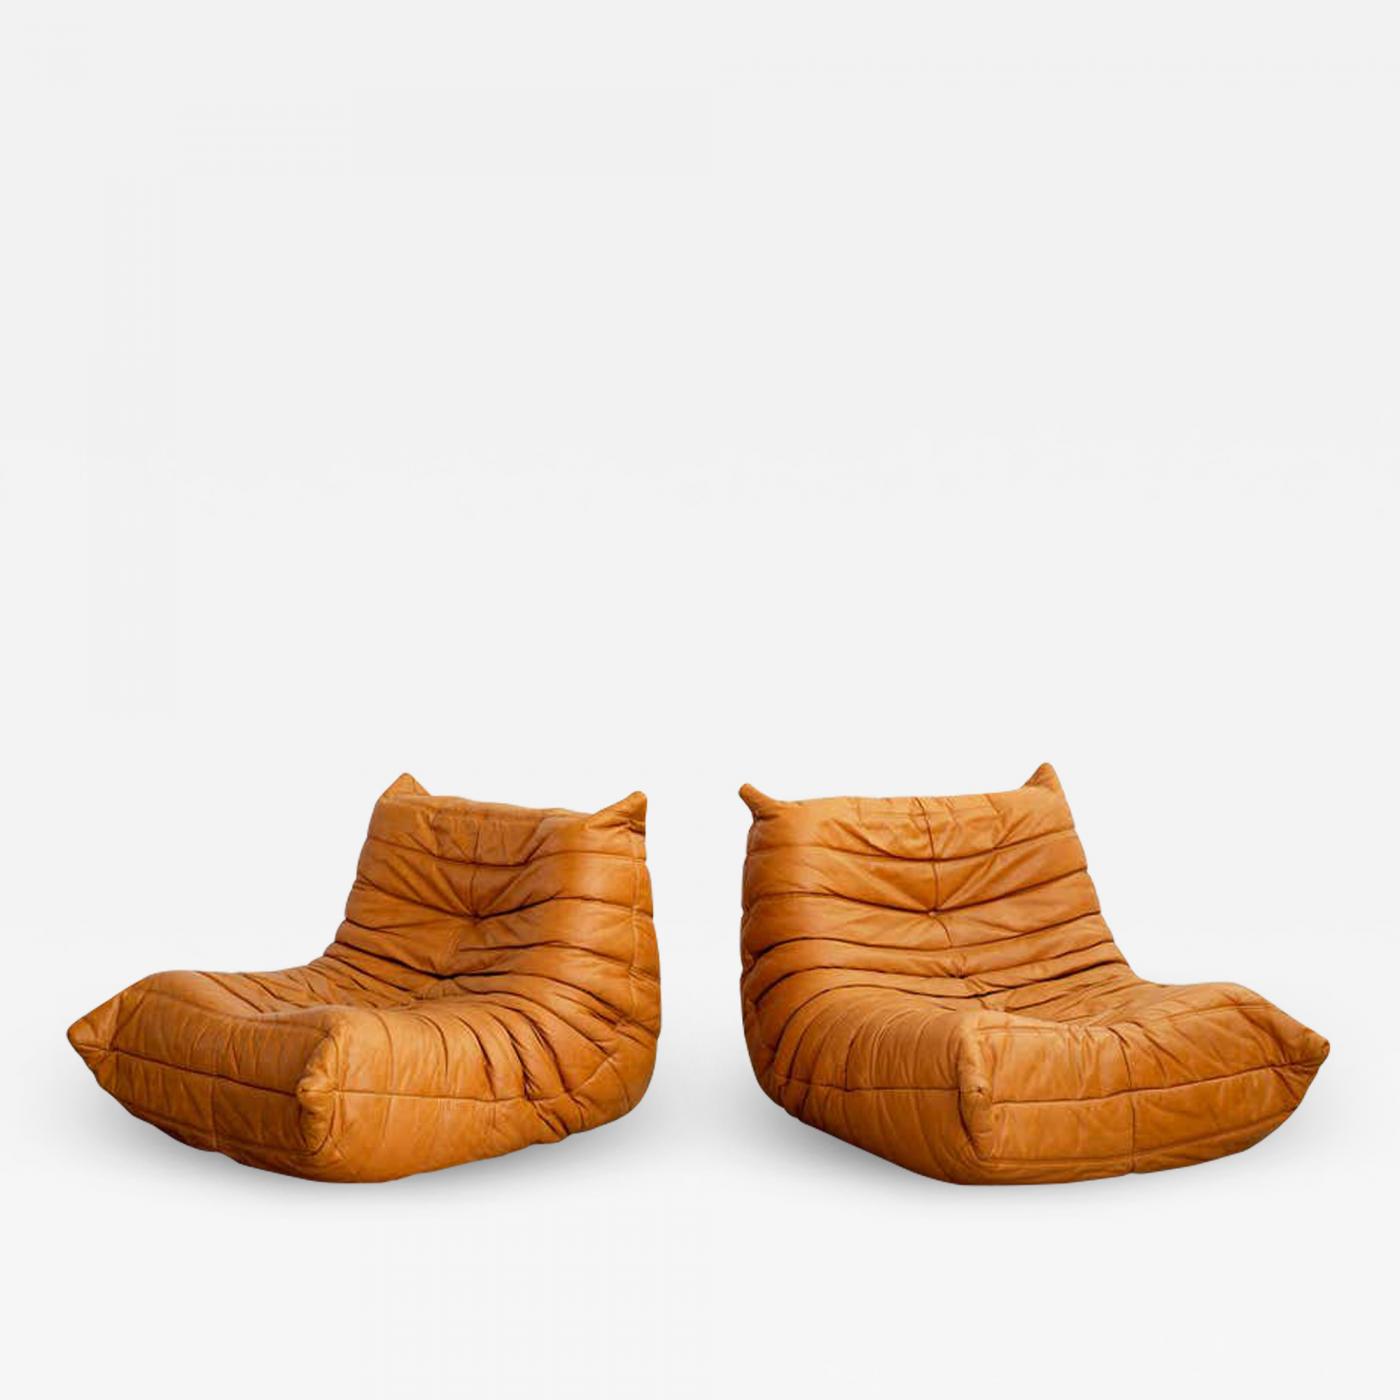 Lounge Chair 'Togo' by Michel Ducaroy for Ligne Roset